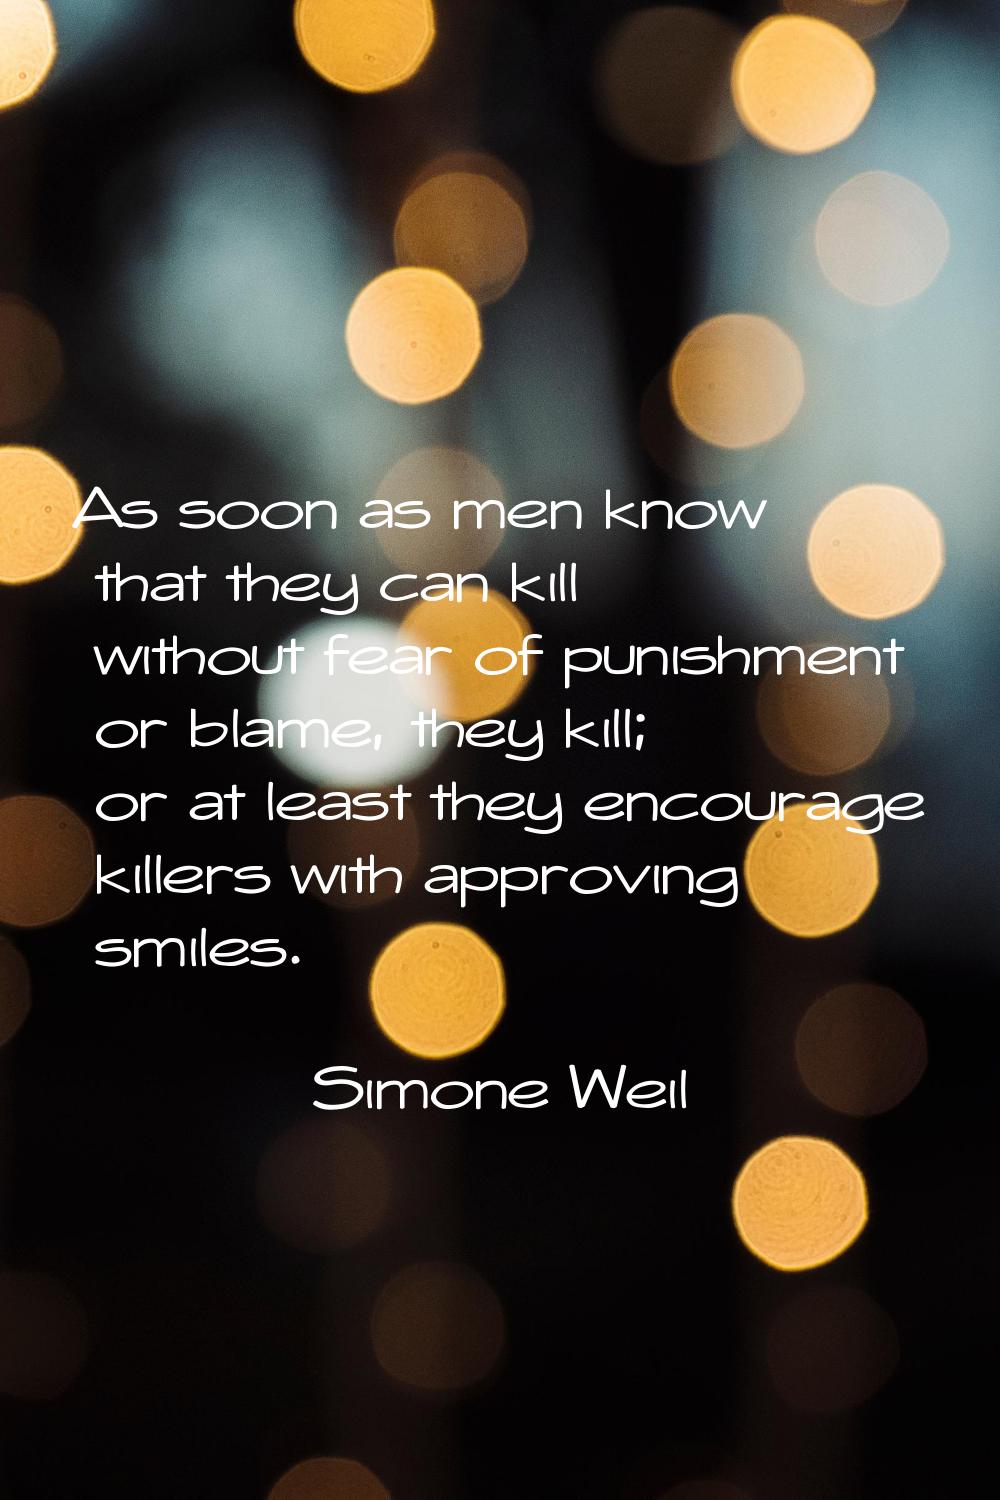 As soon as men know that they can kill without fear of punishment or blame, they kill; or at least 